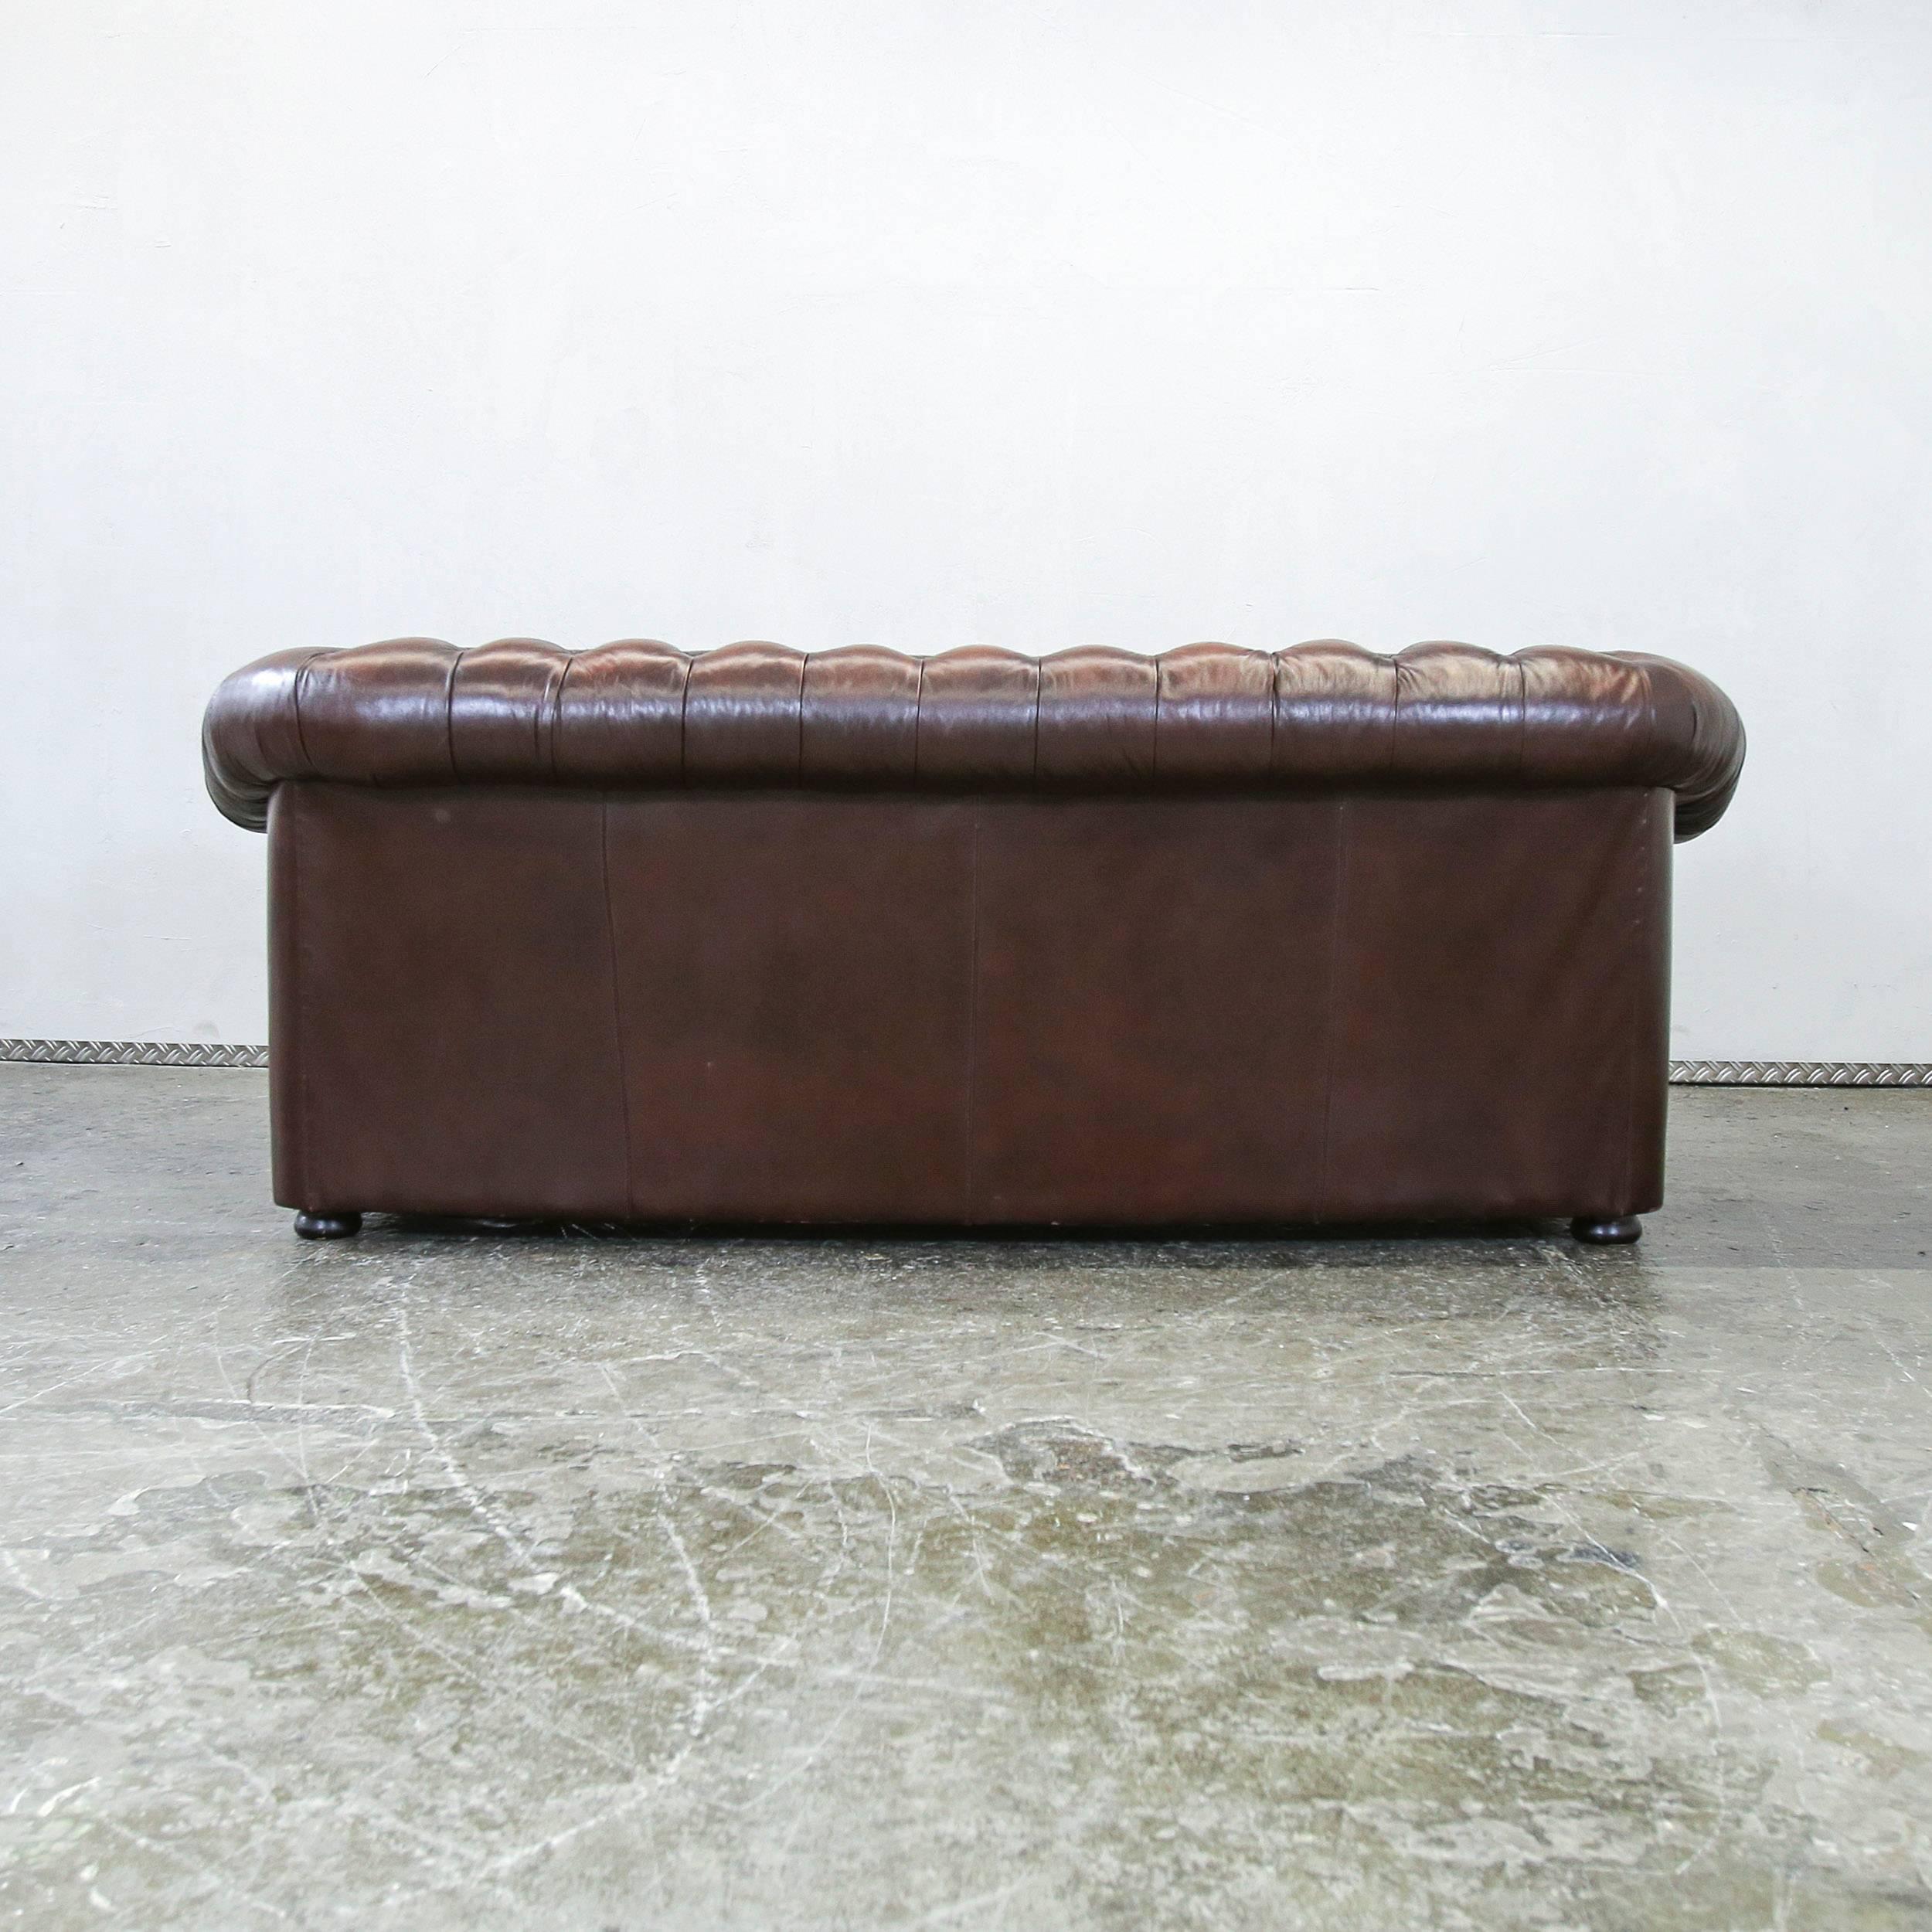 Chesterfield Leather Sofa Brown Three-Seat Couch Retro Vintage In Good Condition For Sale In Cologne, DE